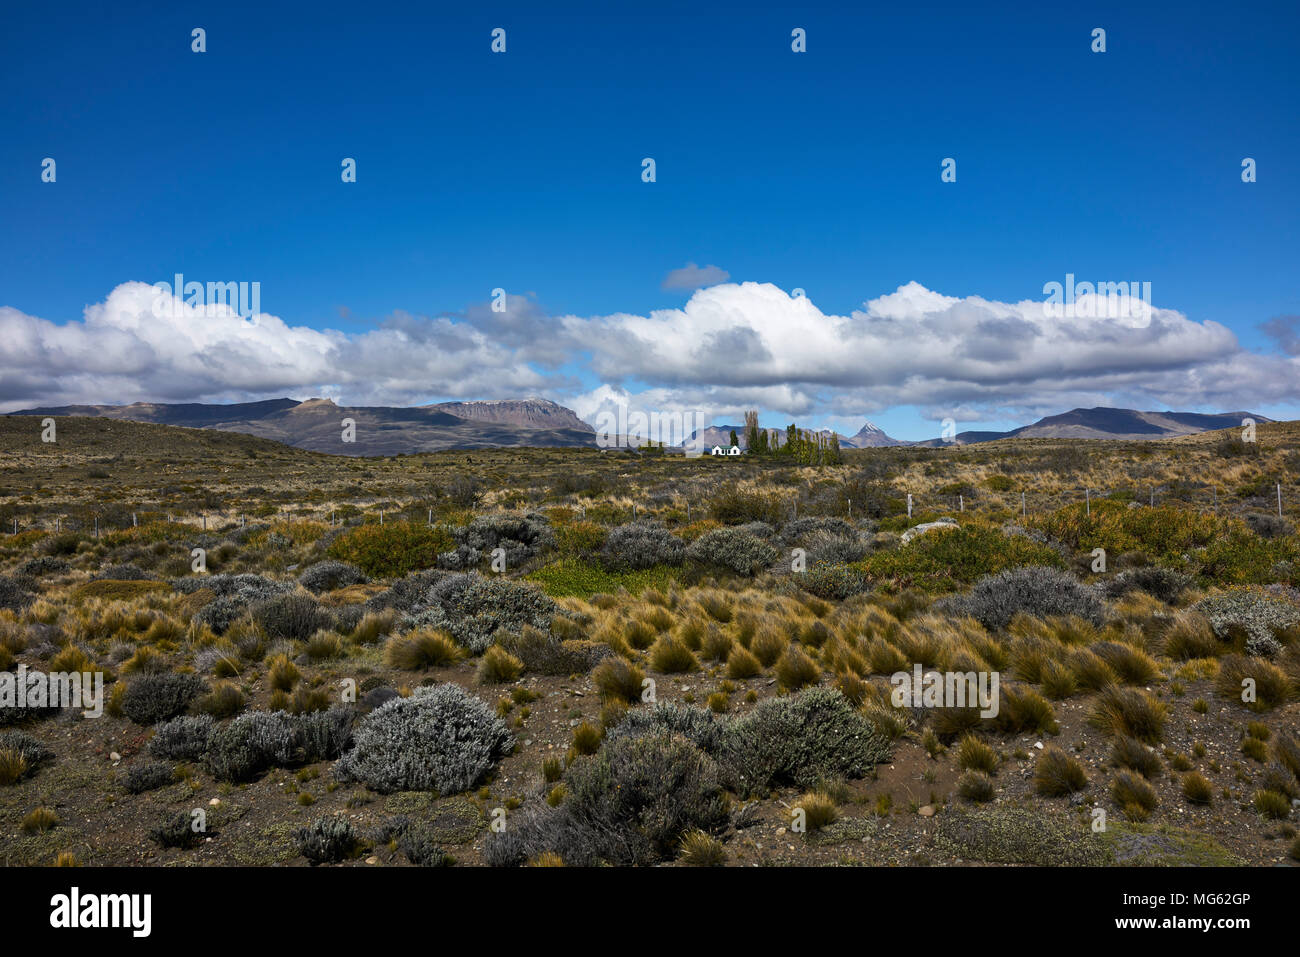 Patagonian steppes panorama on a summer day. A bright blue sky above. Horizon over land. Diminishing perspective. Stock Photo